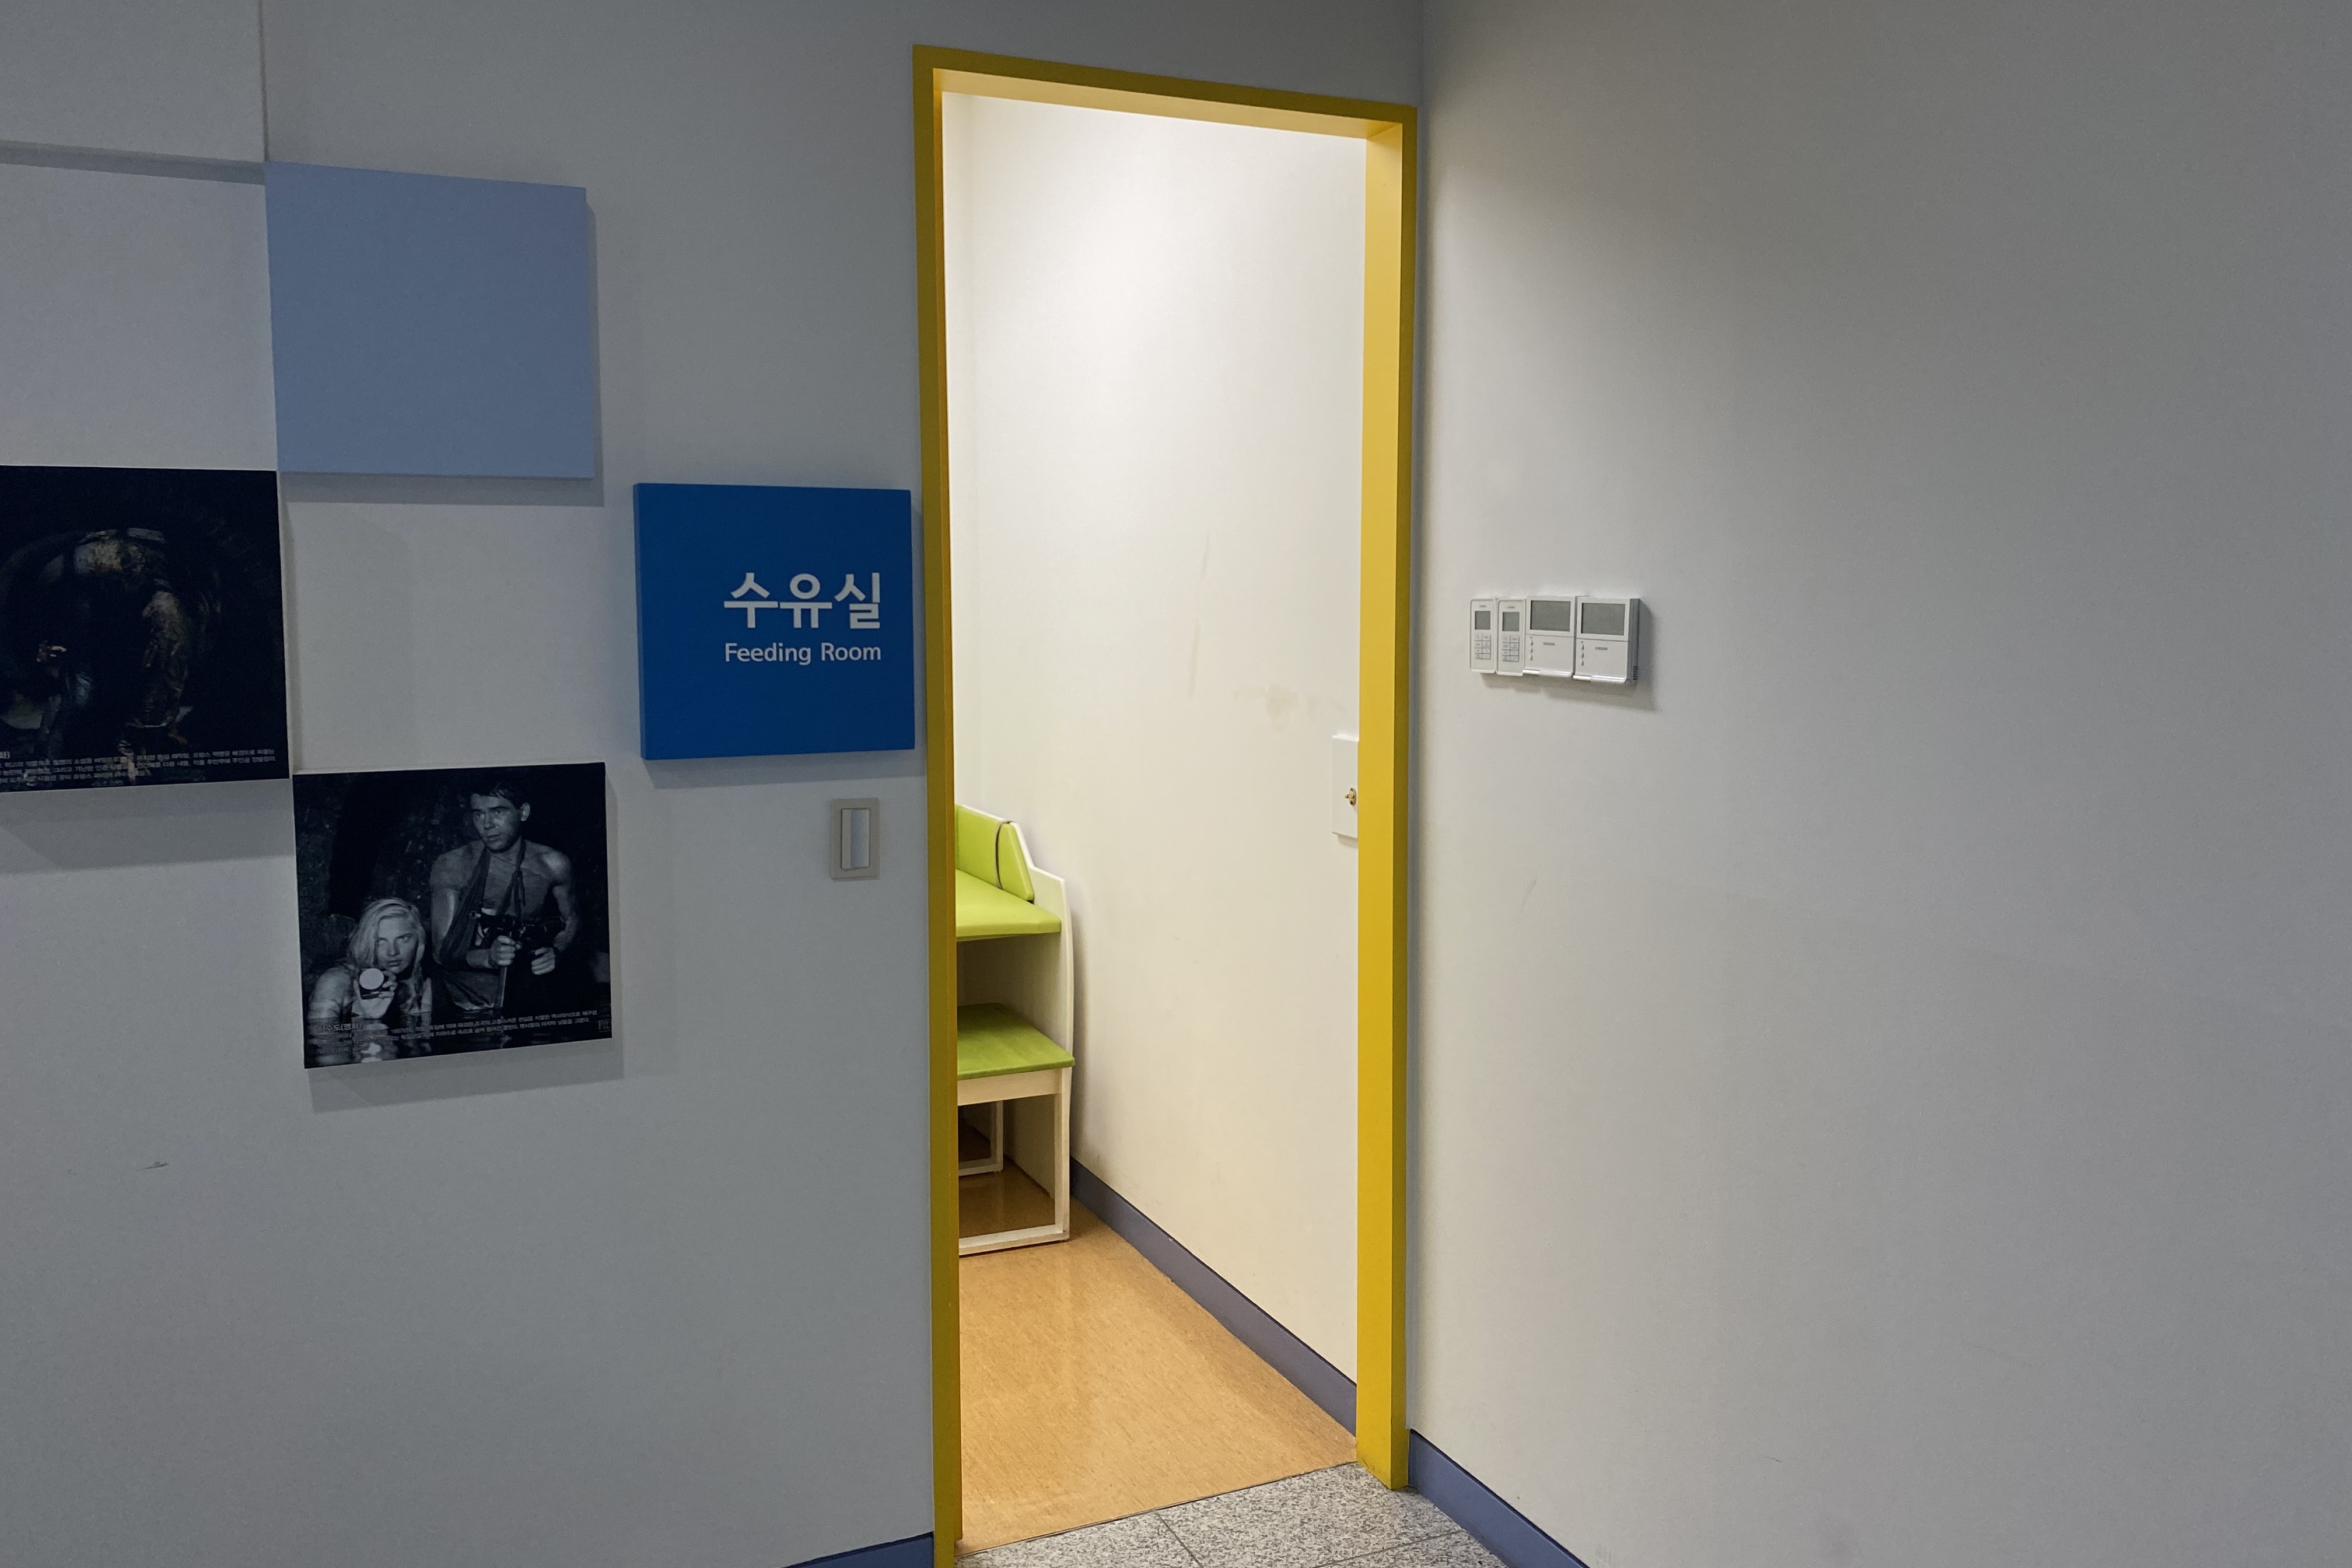 Lounge for families with children 0 : Entrance/exit of the nursing room at Seoul Sewerage Science Museum